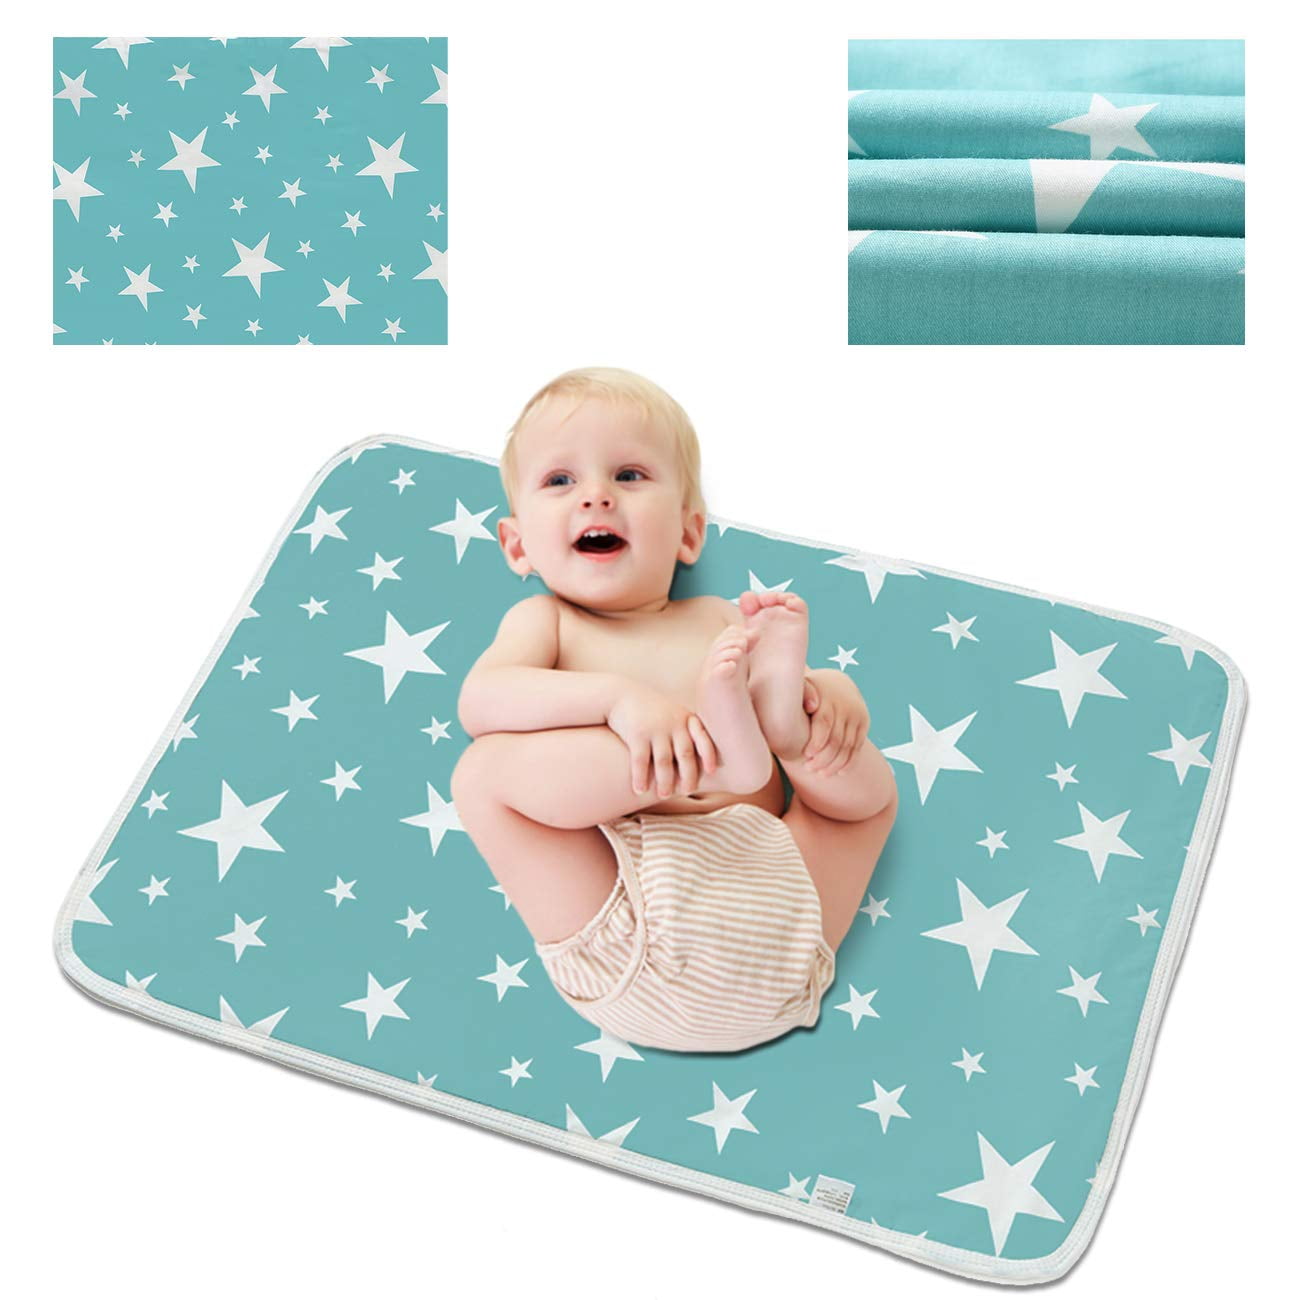 Portable Diaper Pad Travel Table Station Waterproof Baby Changing Mat Sheet FG 